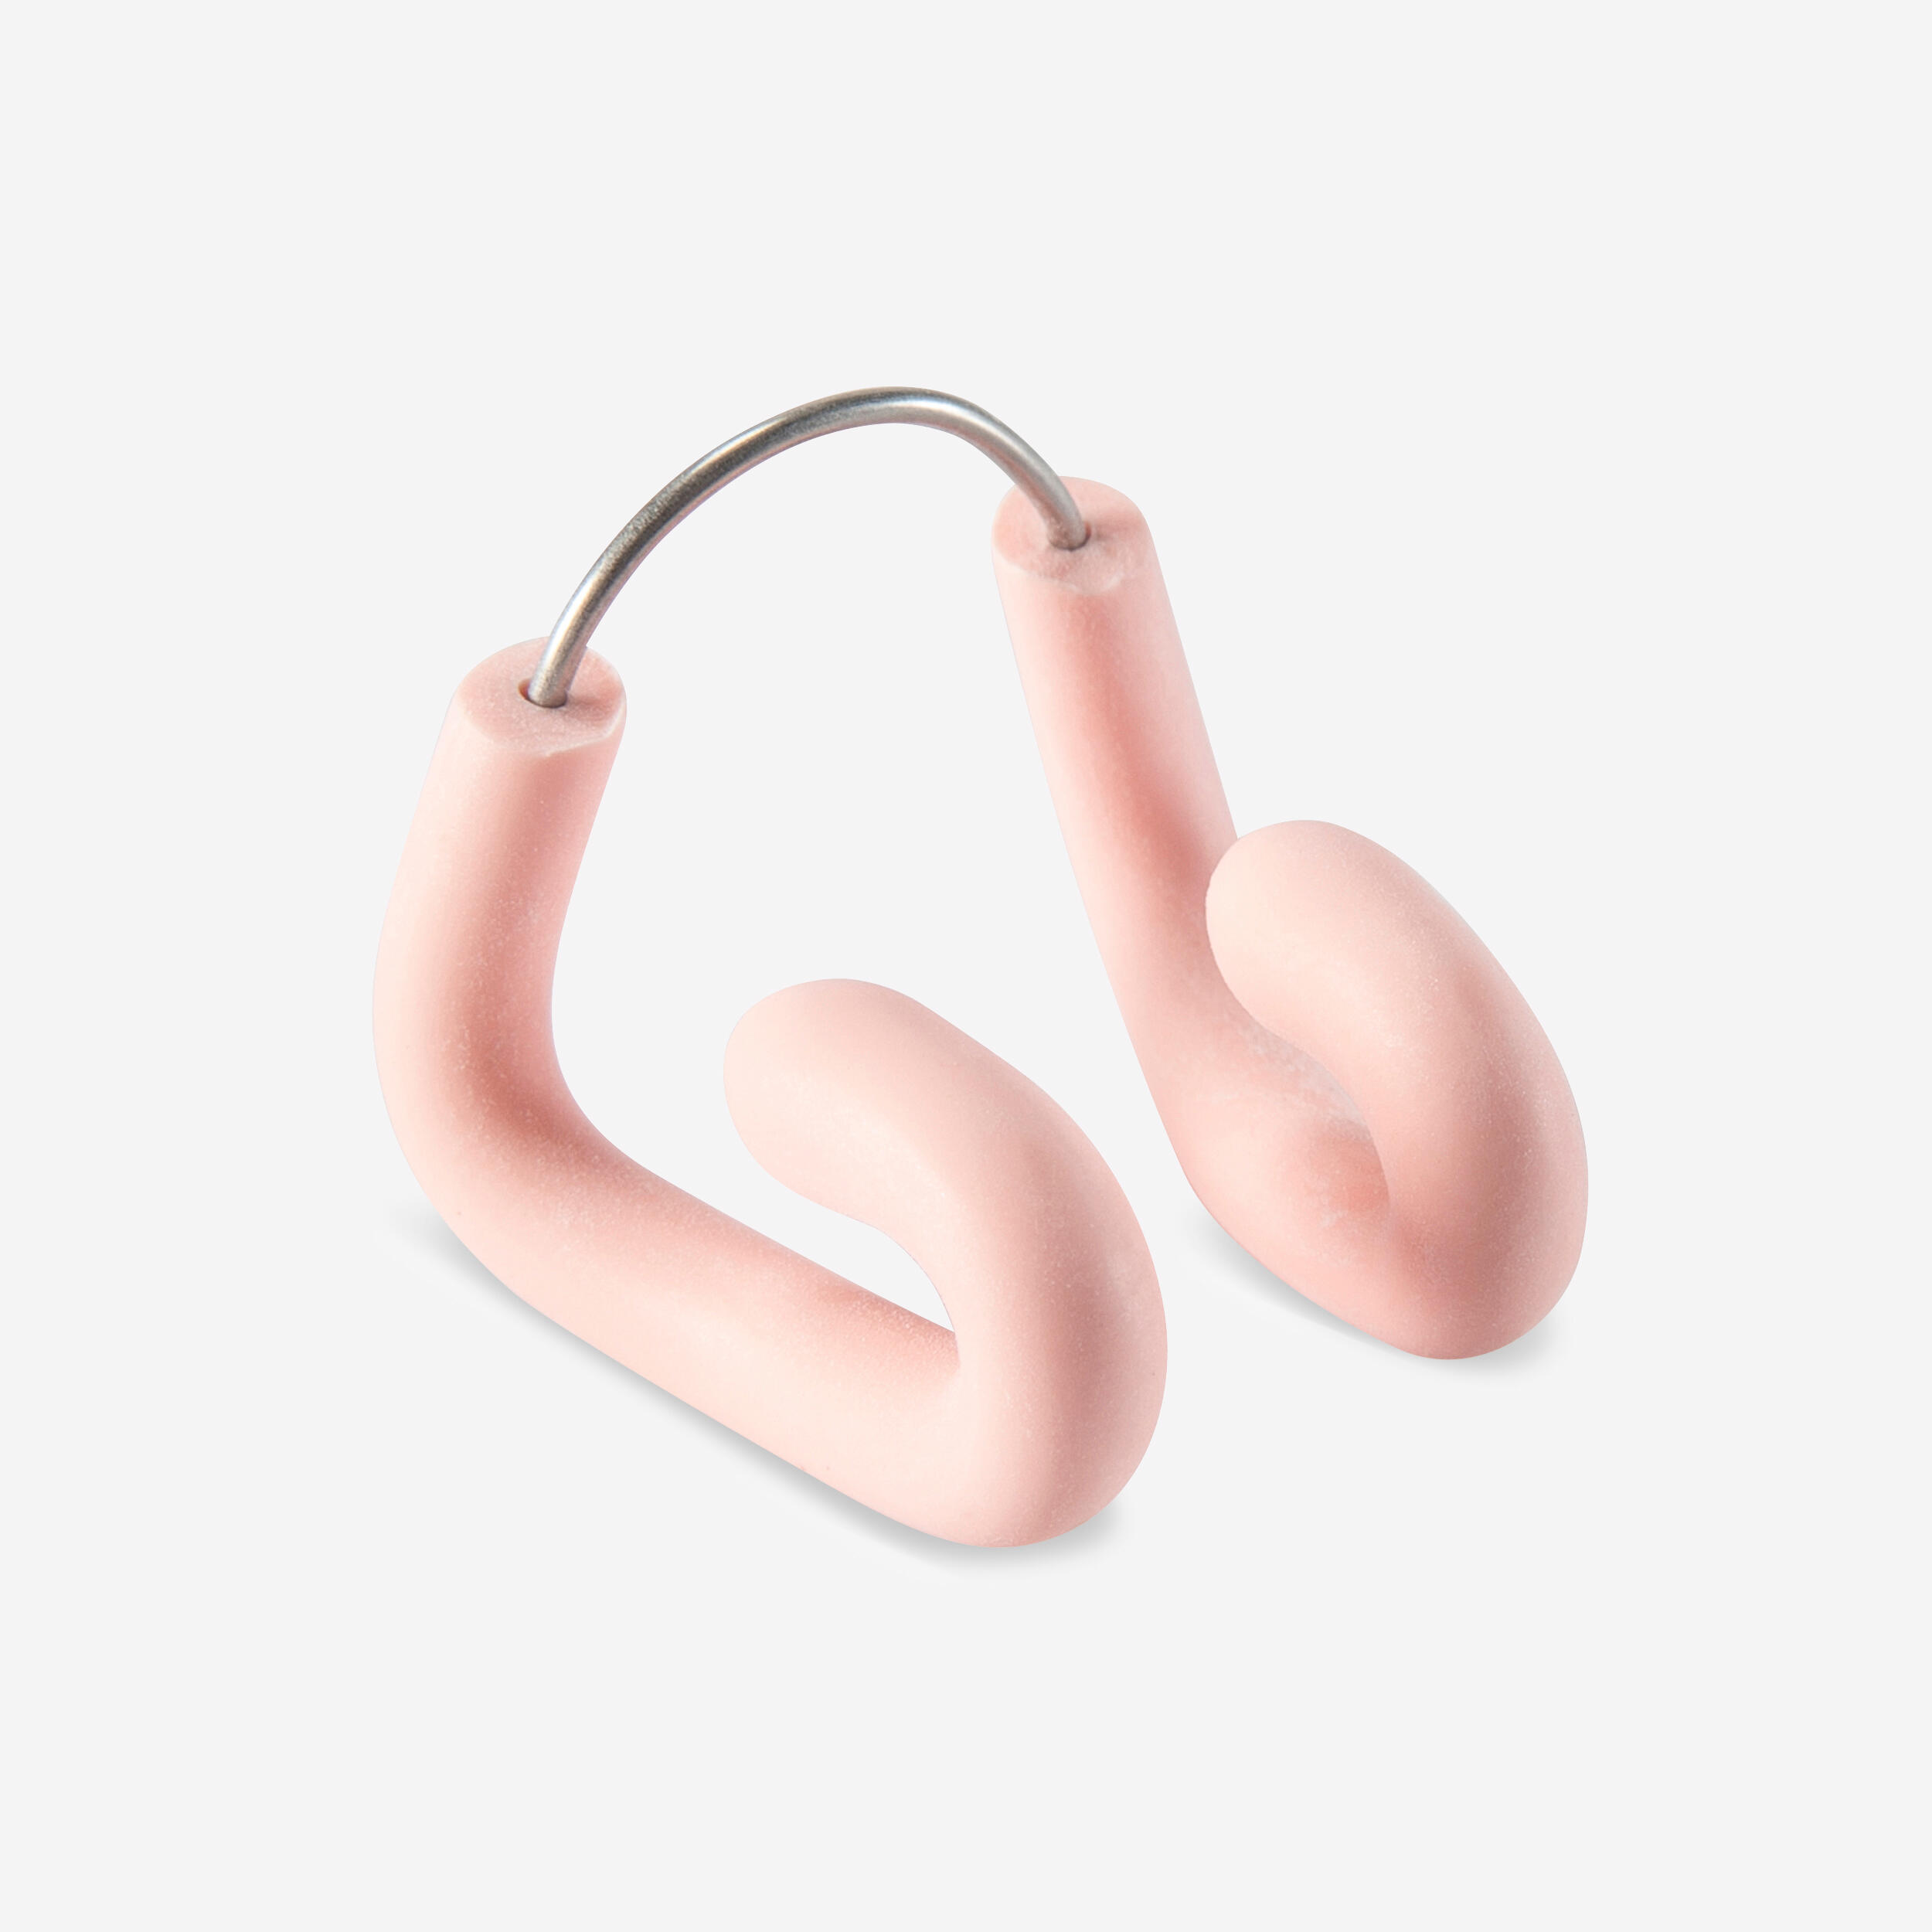 SWIMMING ADJUSTABLE STAINLESS STEEL-LATEX NOSE CLIP - PASTEL PINK 1/4